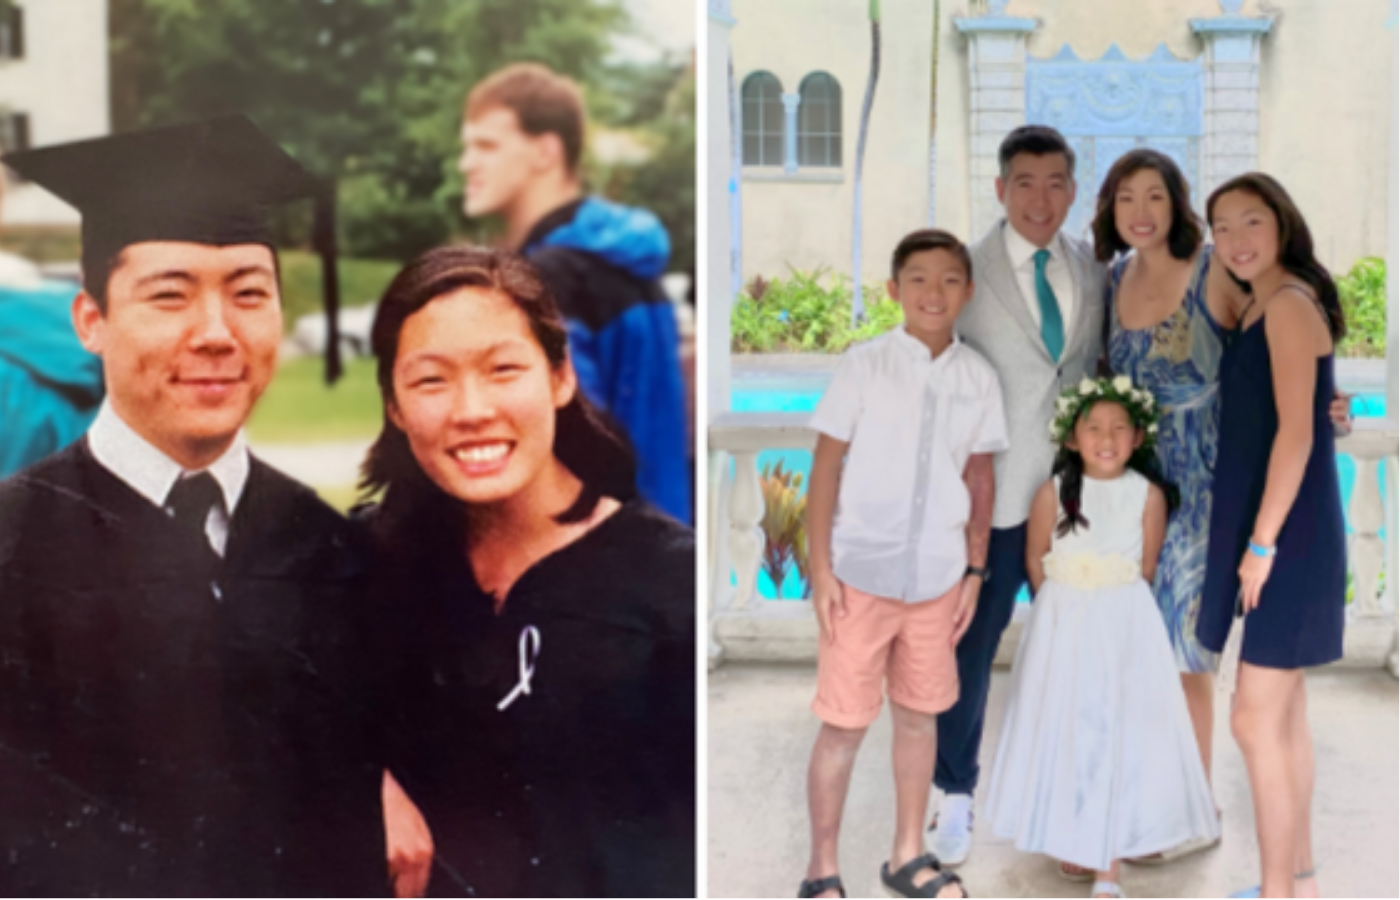 A photo of a couple at graduation and then a photo of them today posing with their three children. 